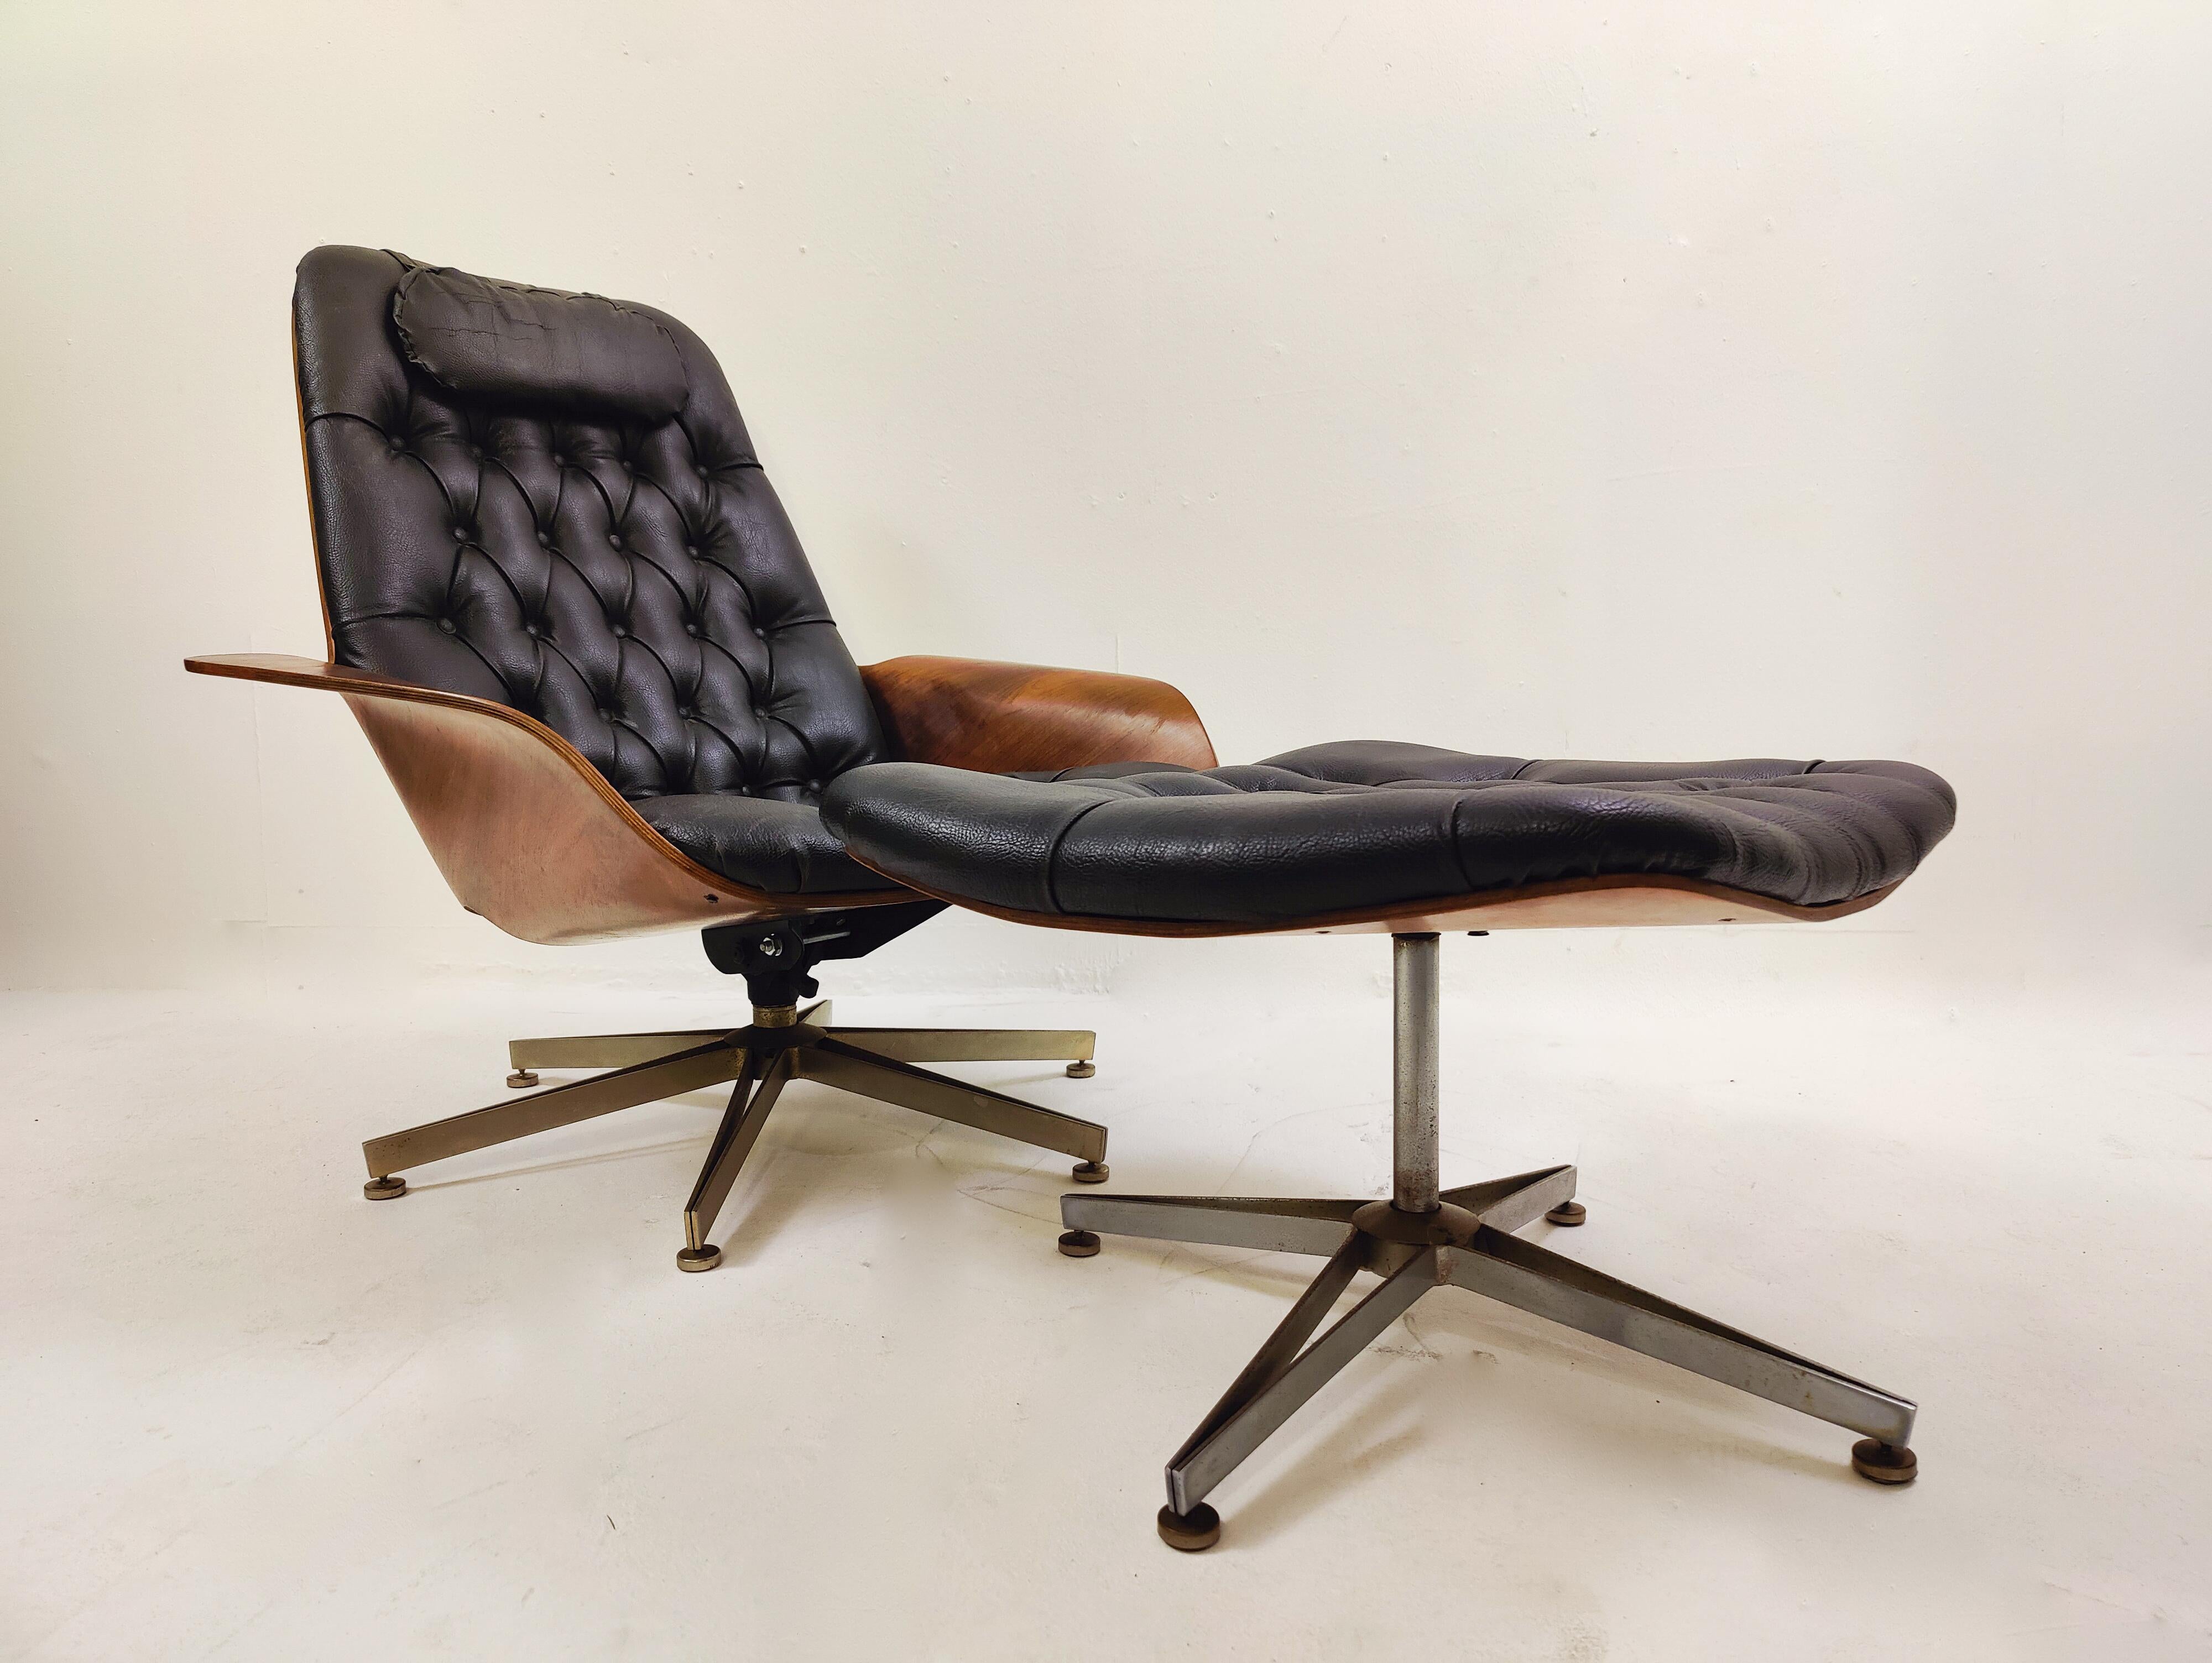 Mid-20th Century Swivel Black Leather Armchair, Plywood Armrests and Ottoman, George Mulhauser